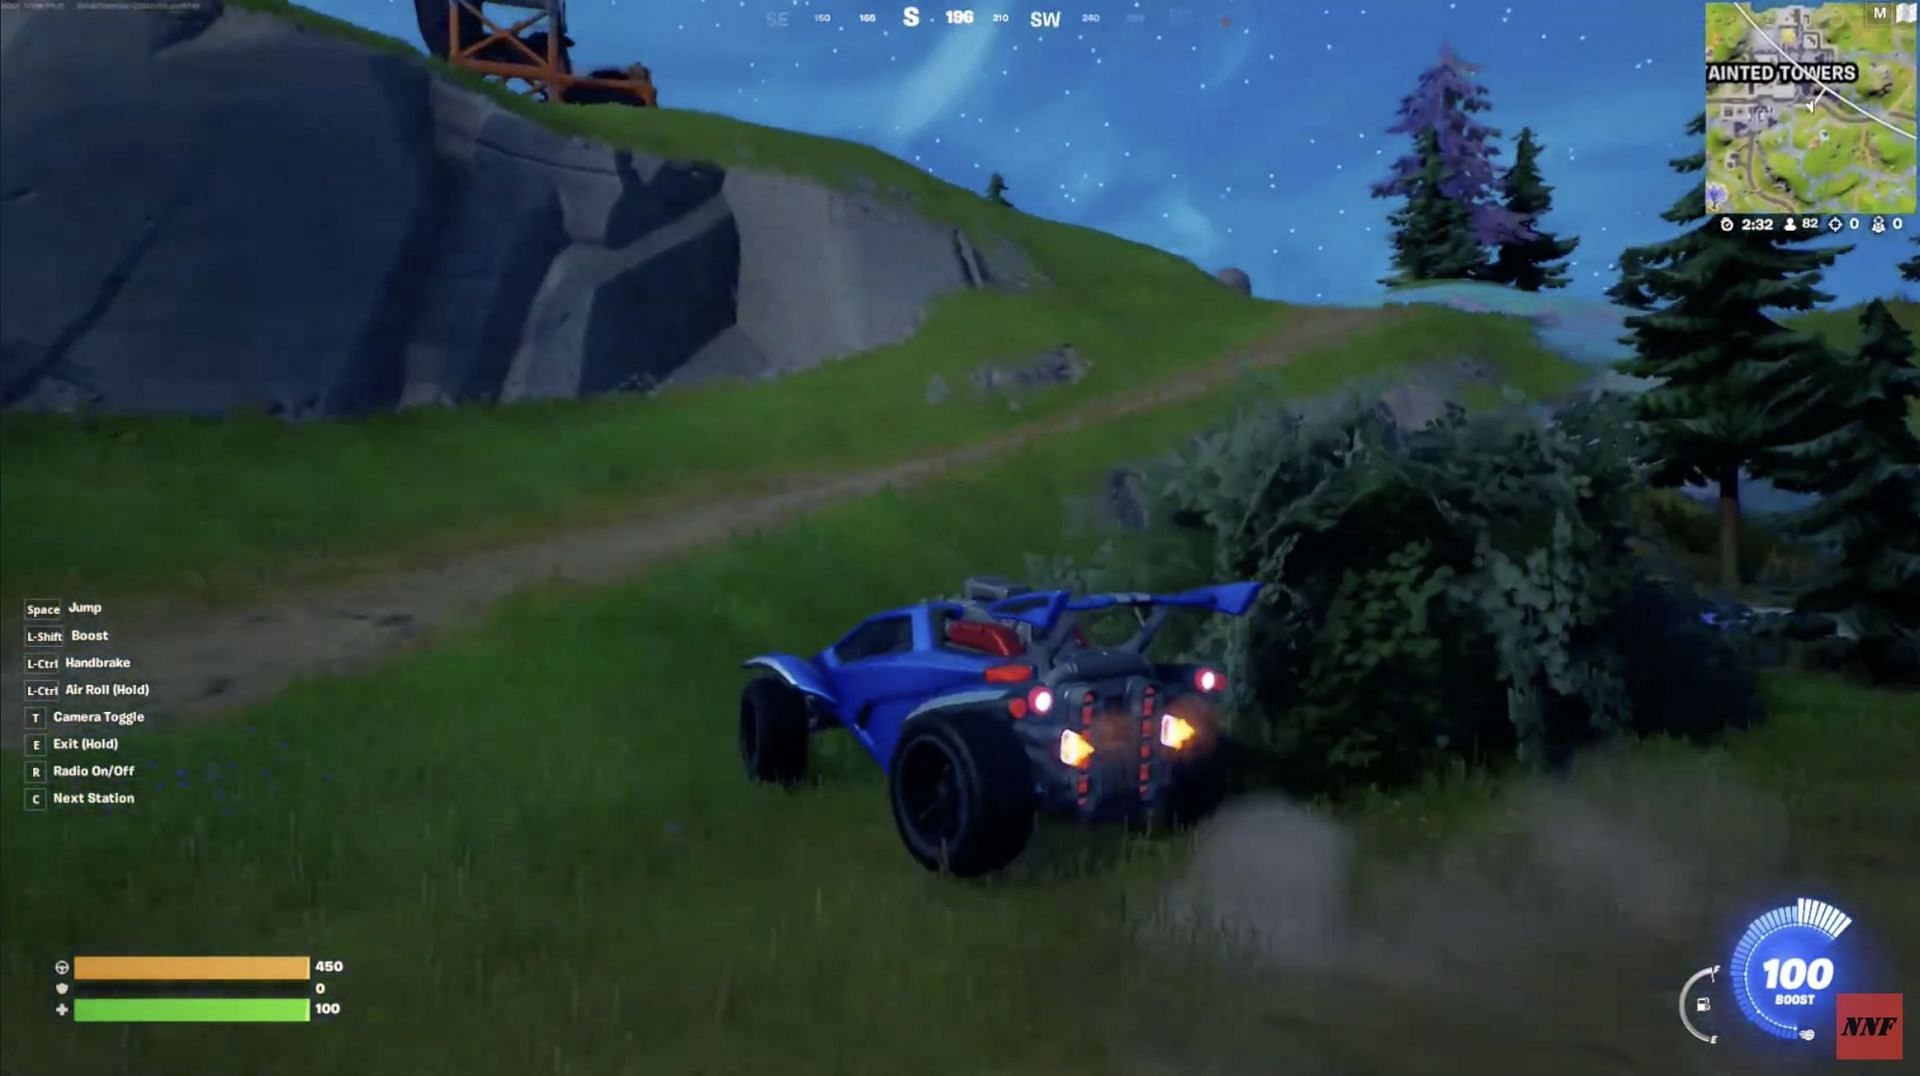 Drive to a high place (Image via YouTube/NOOB NOOB FRUIT)